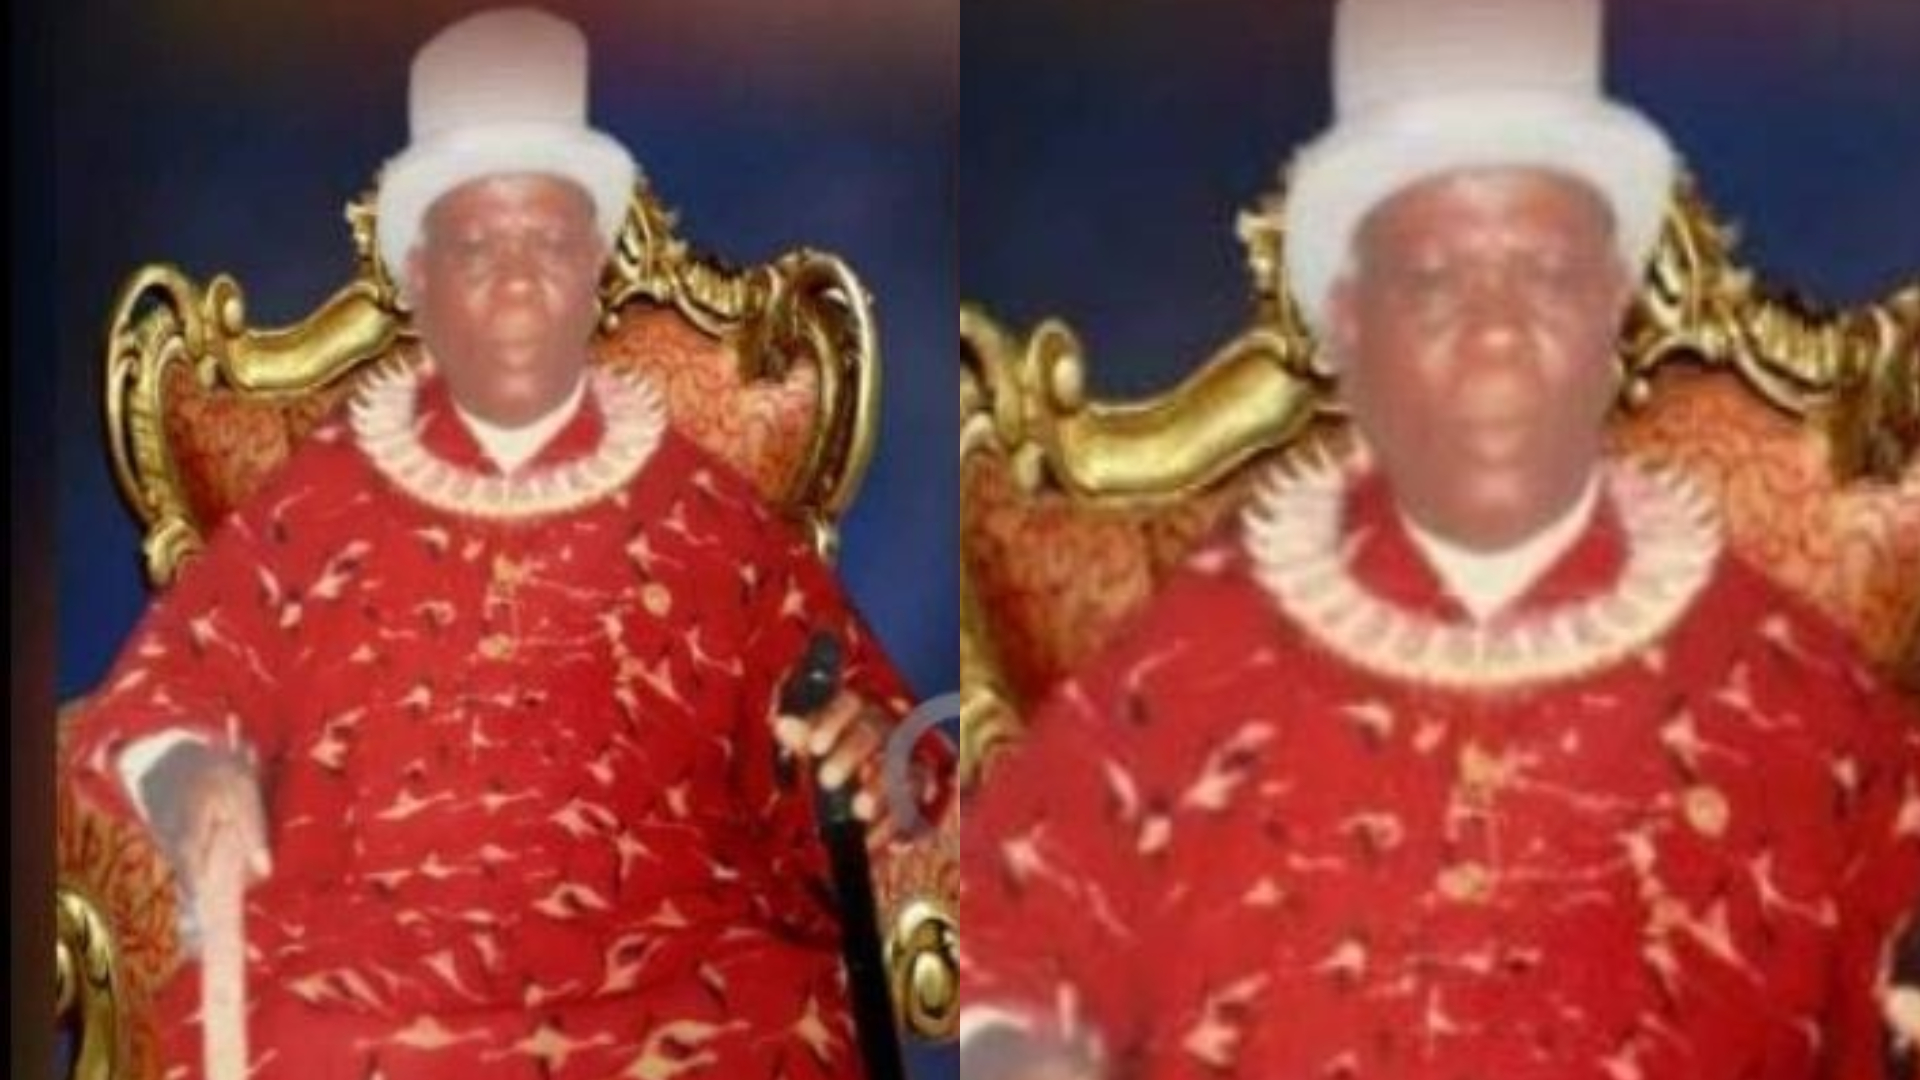 3 suspects sentenced to death for kidnapping and killing Rivers Chief after payment of ransom